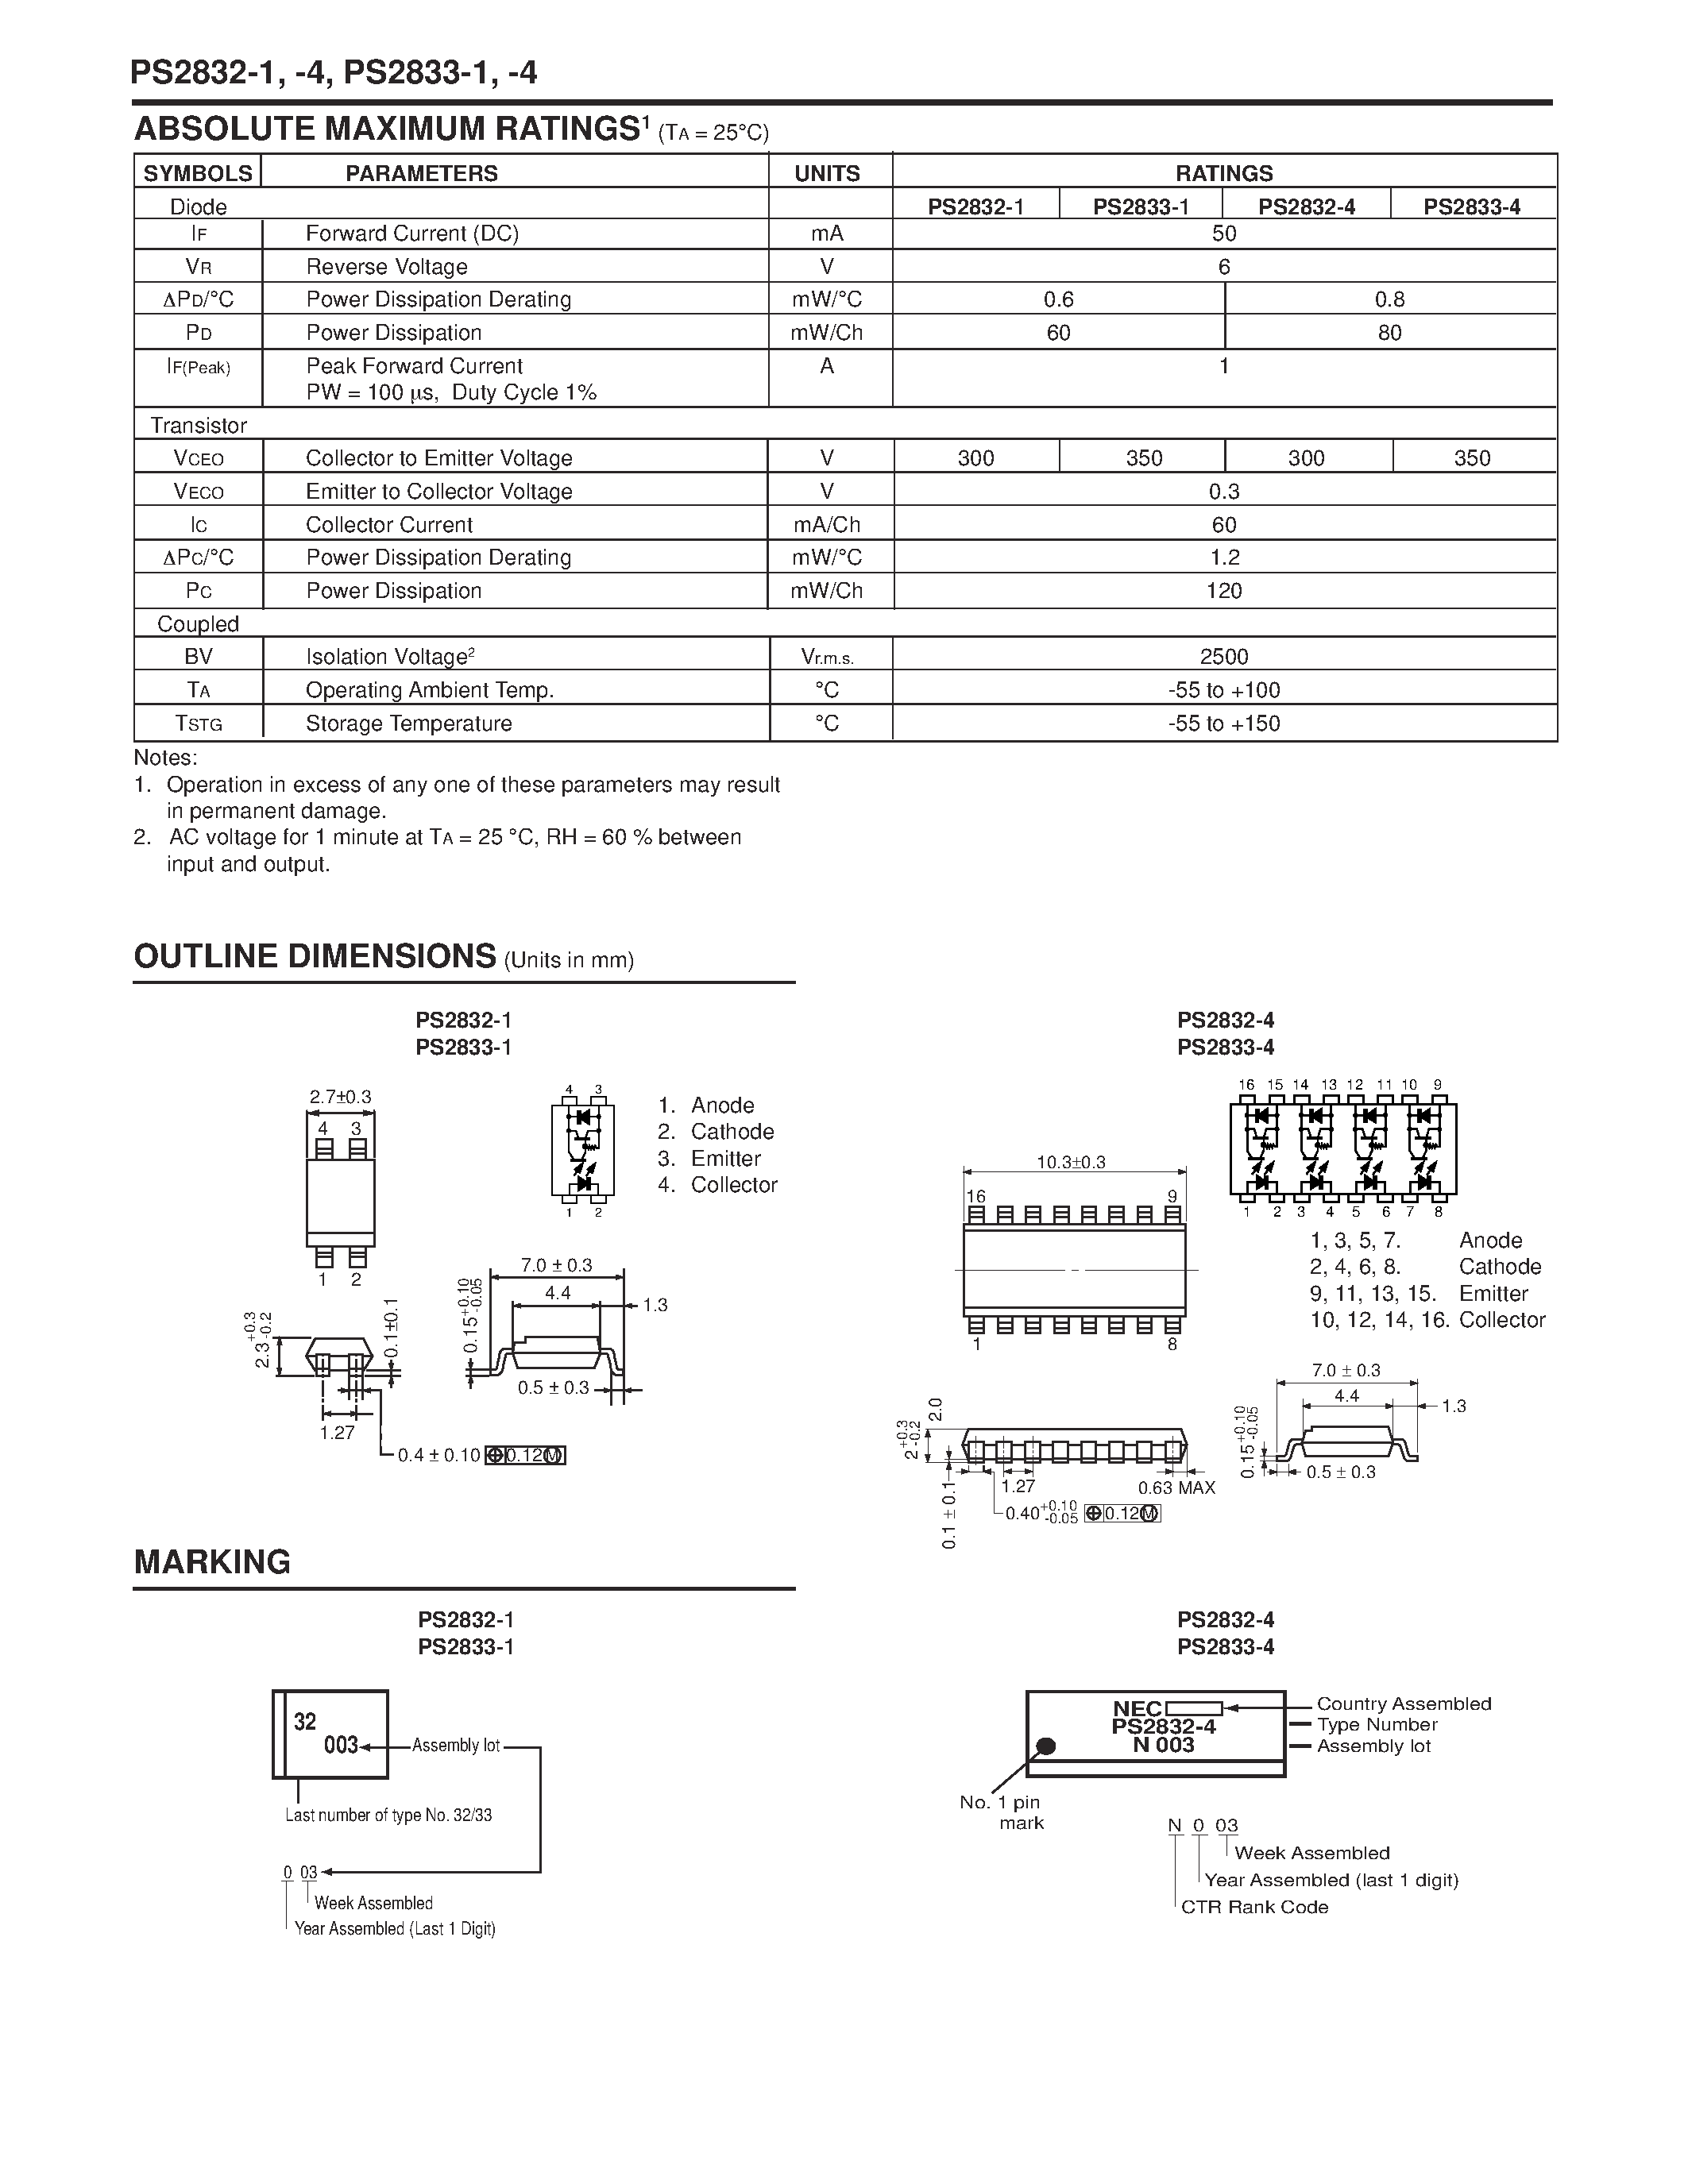 Datasheet PS2833-1-V-F3 - HIGH ISOLATION VOLTAGE HIGH COLLECTOR TO EMITTER VOLTAGE SOP MULTI OPTOCOUPLER page 2